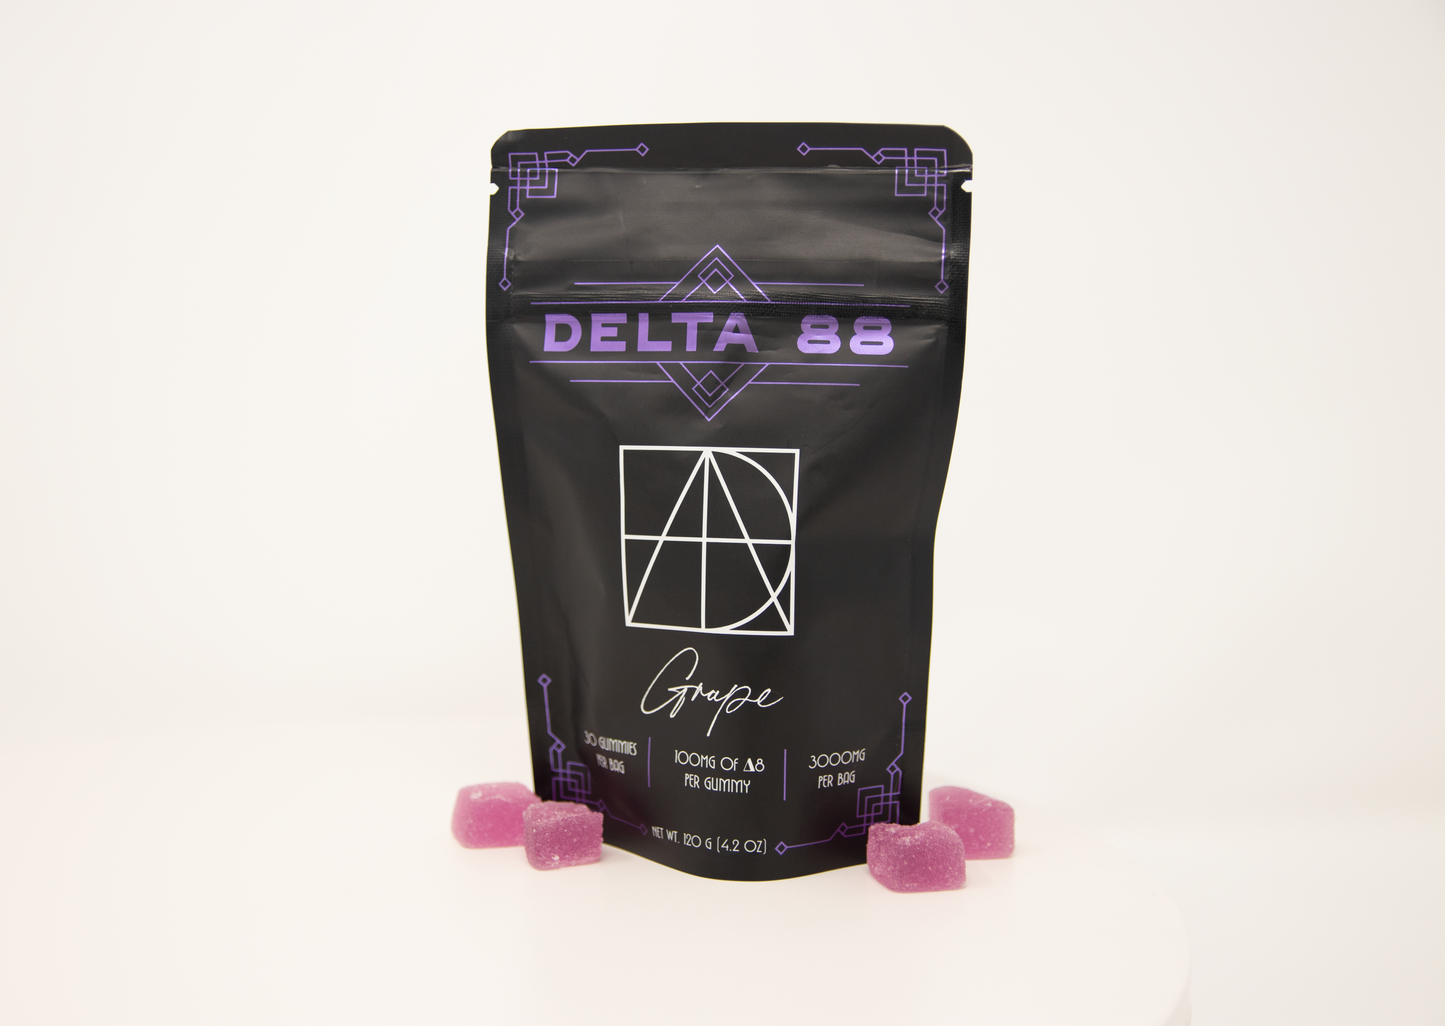 Delta 88 Grape flavored gummies that are 100mg per gummy with 30 count per bag. This picture shows the bag and what the gummies look like.